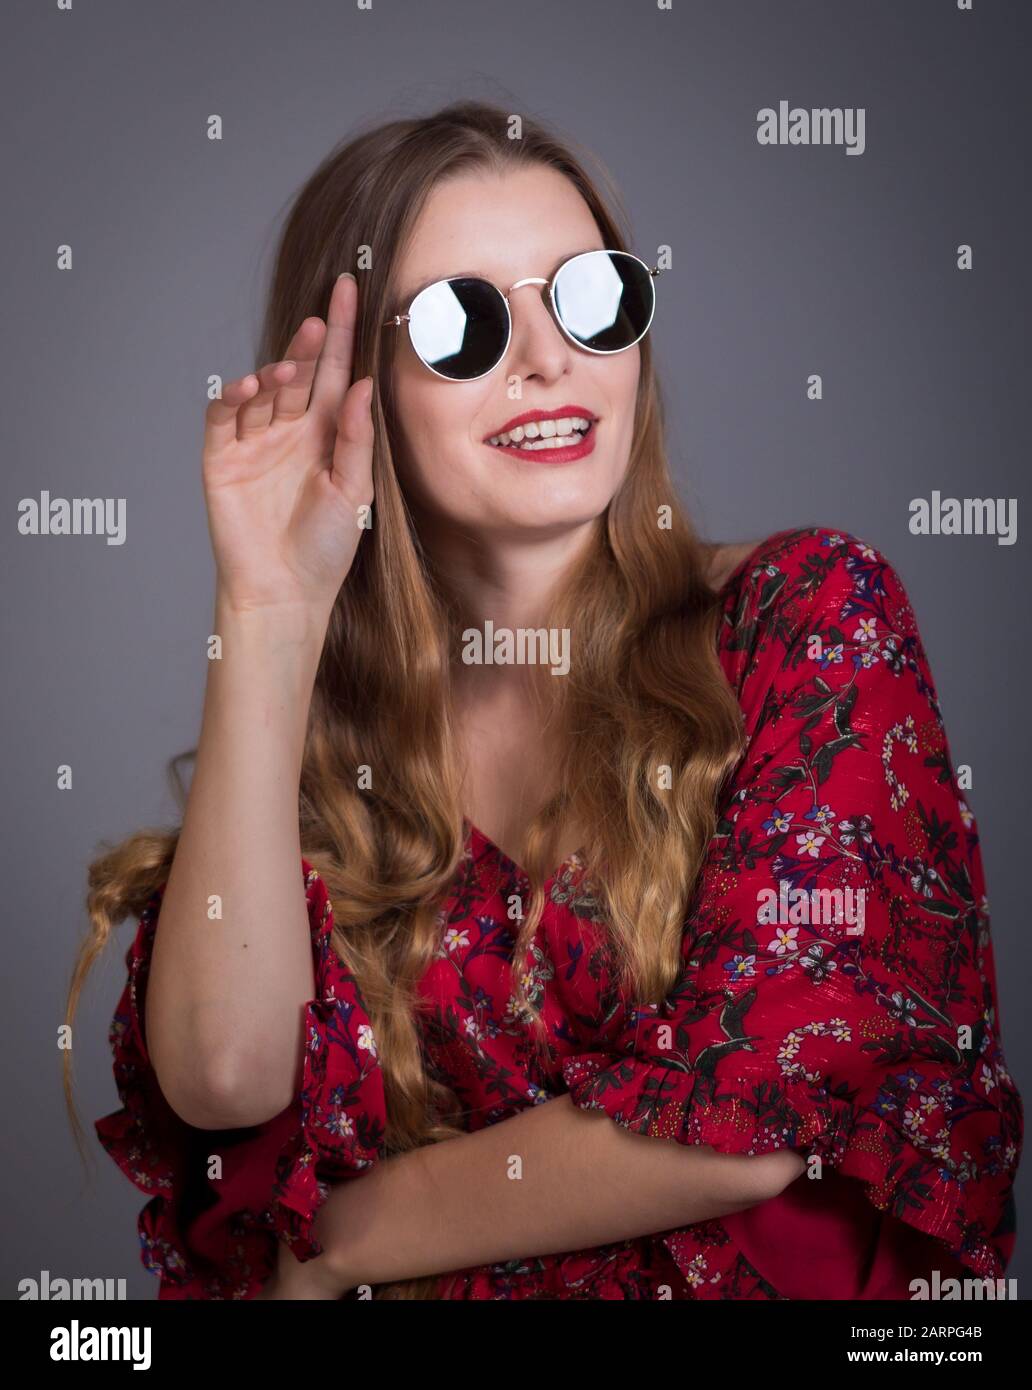 Young woman posing in retro 70's outfits in studio setting Stock Photo